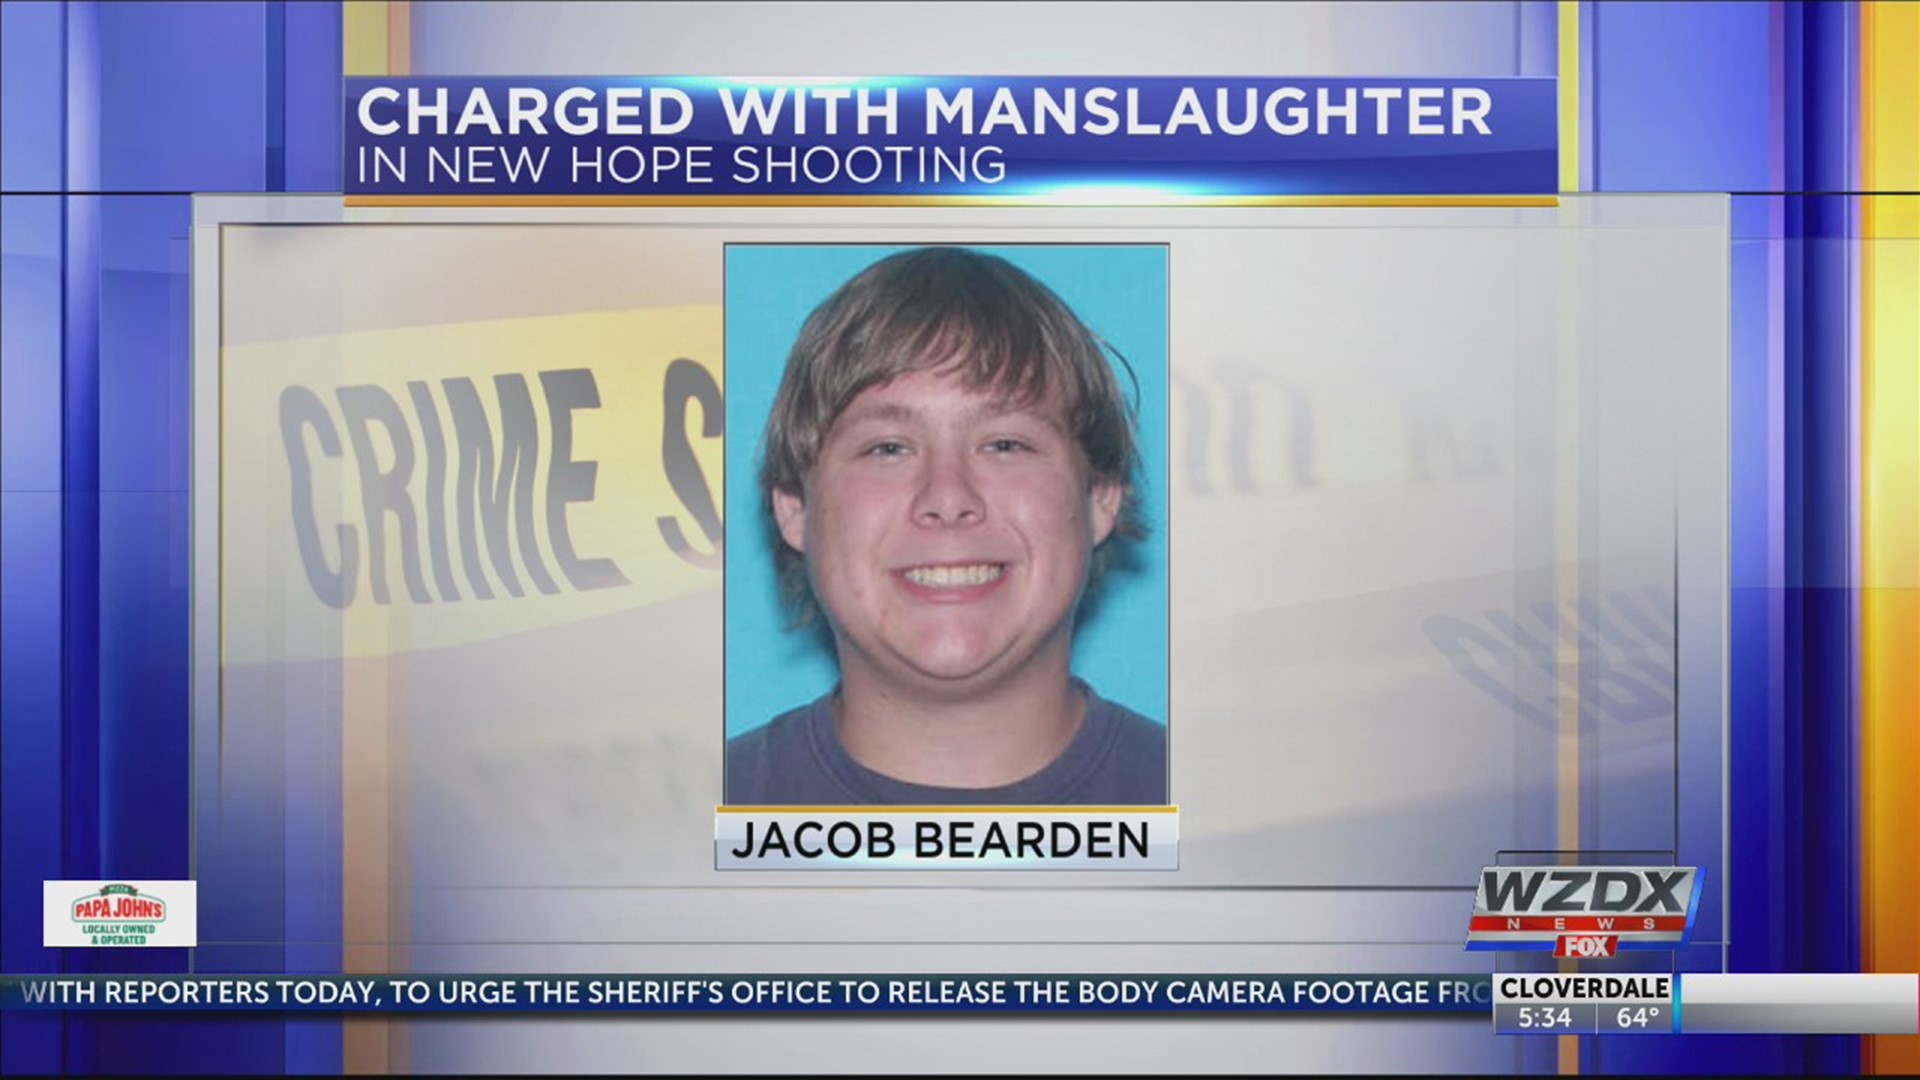 The Madison County Sheriff’s Office announced that Jacob Tanner Bearden, 19, of Grant, was charged with manslaughter following a shooting in New Hope on Monday that left one man dead.